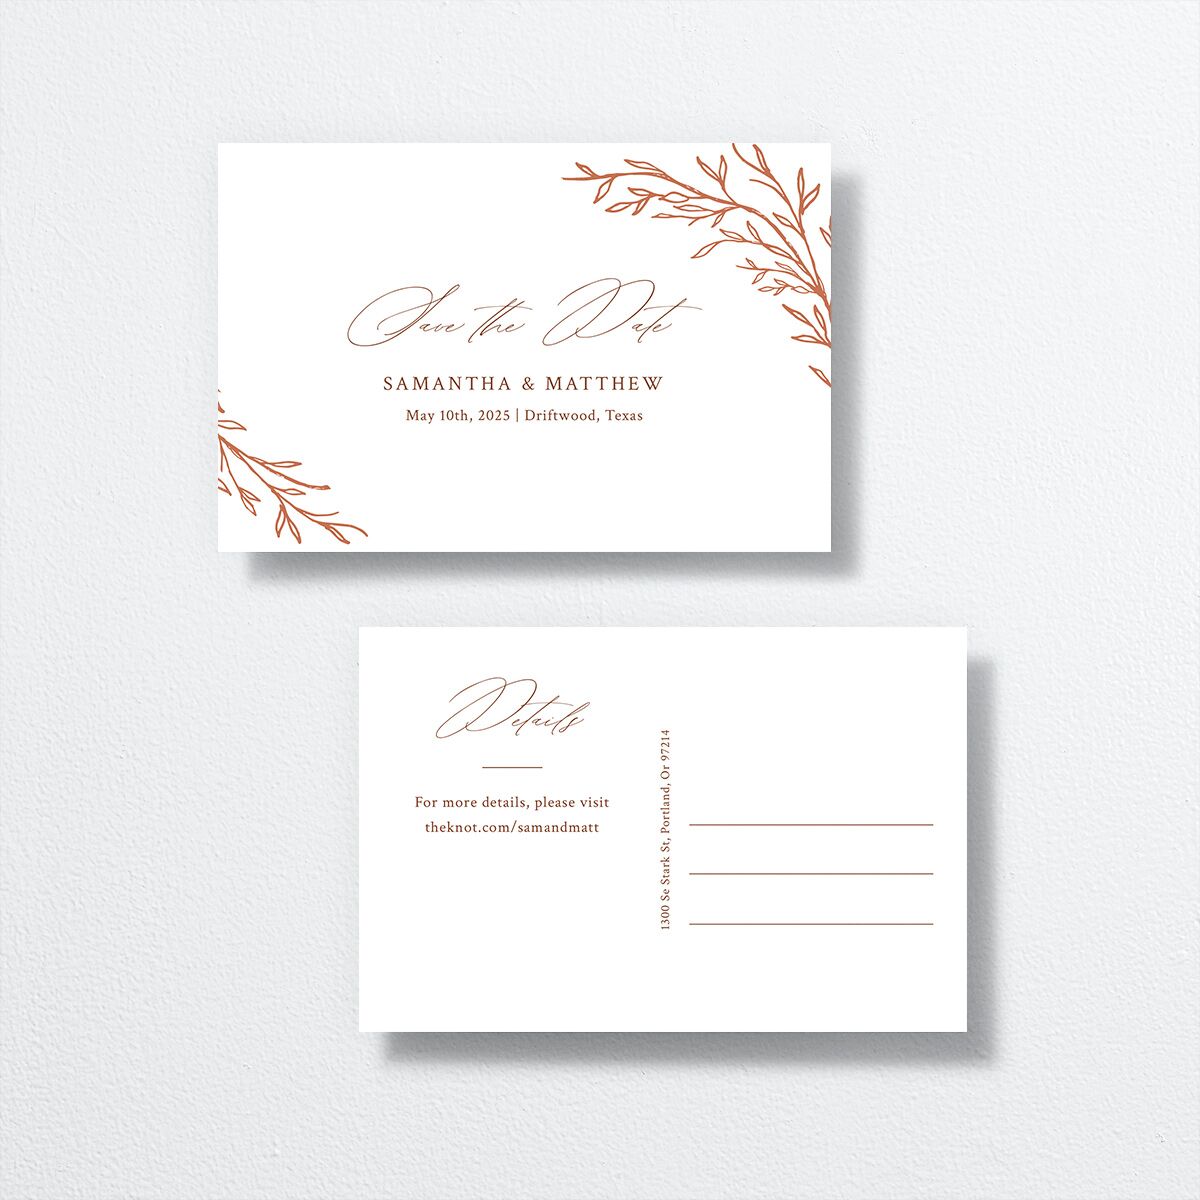 Rustic Branches Save The Date Postcards  front-and-back in red